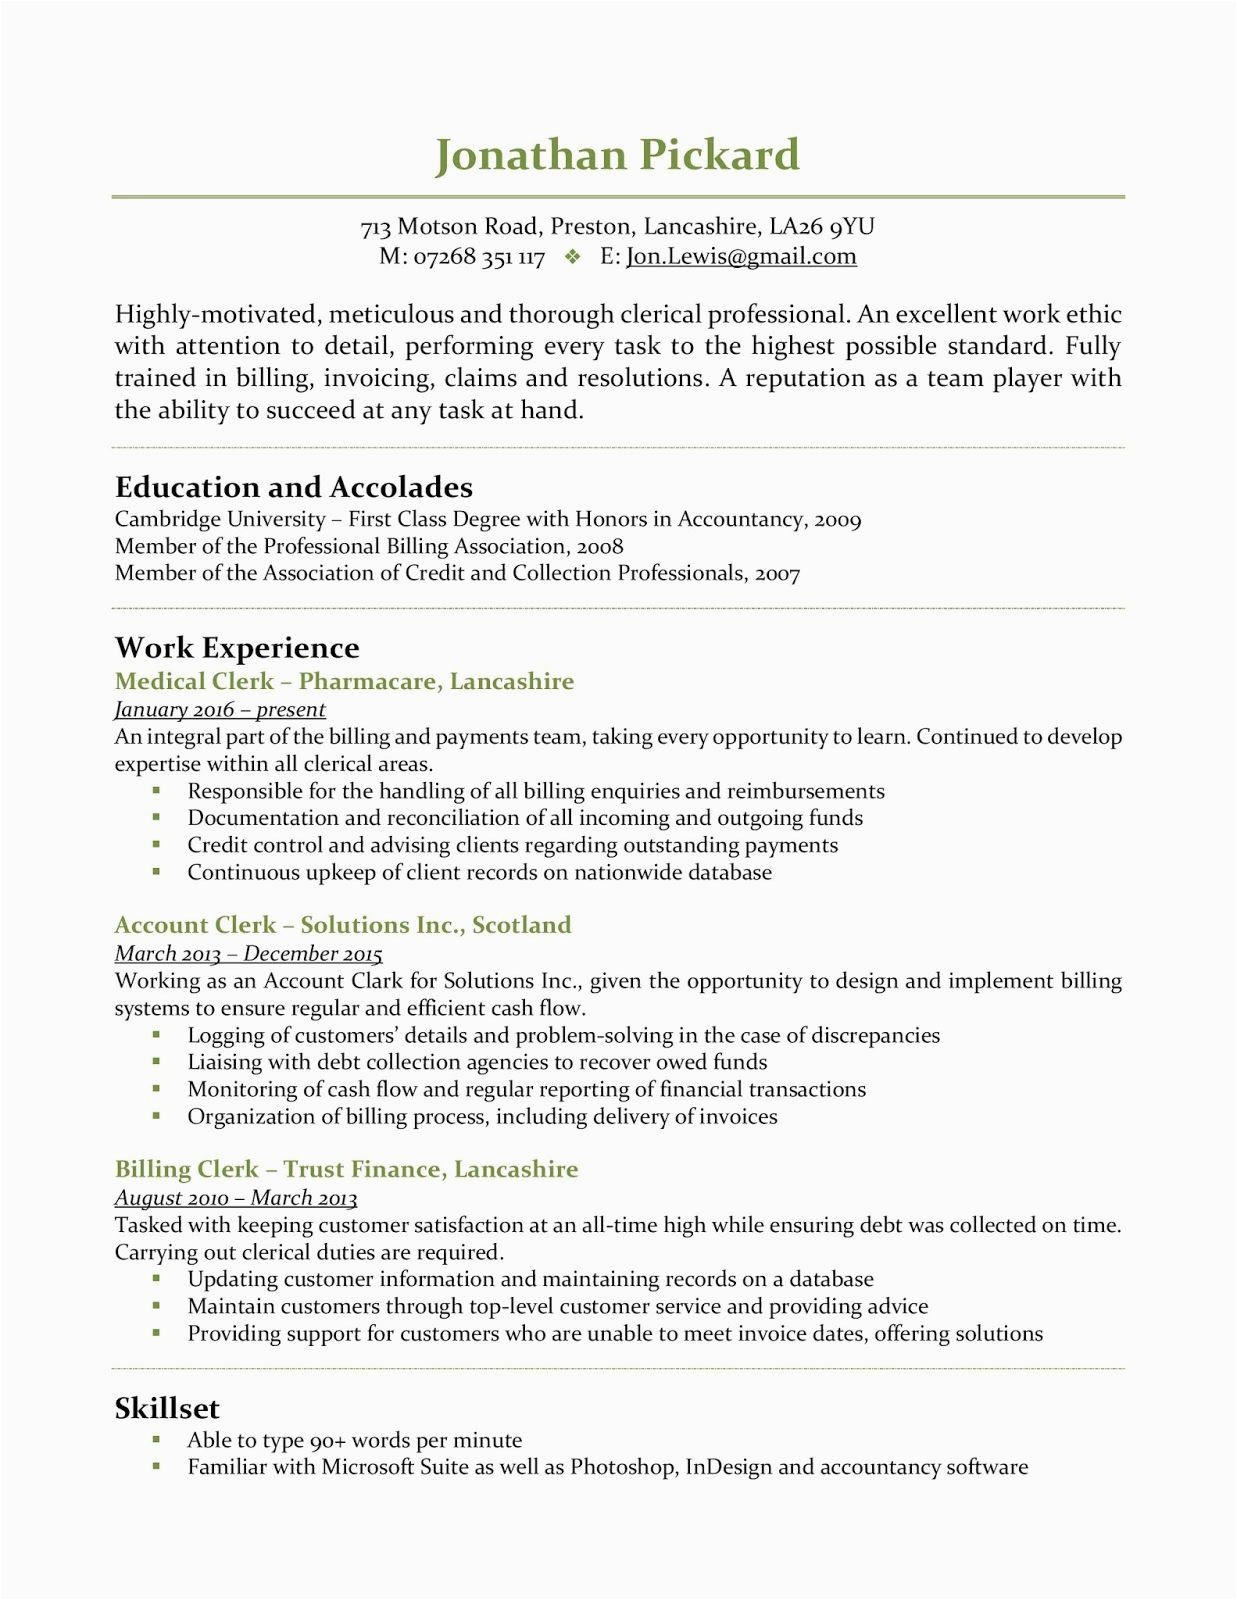 Sample Resume for Bank Clerk with No Experience Cover Letter for Accounts Payable Position with No Experience